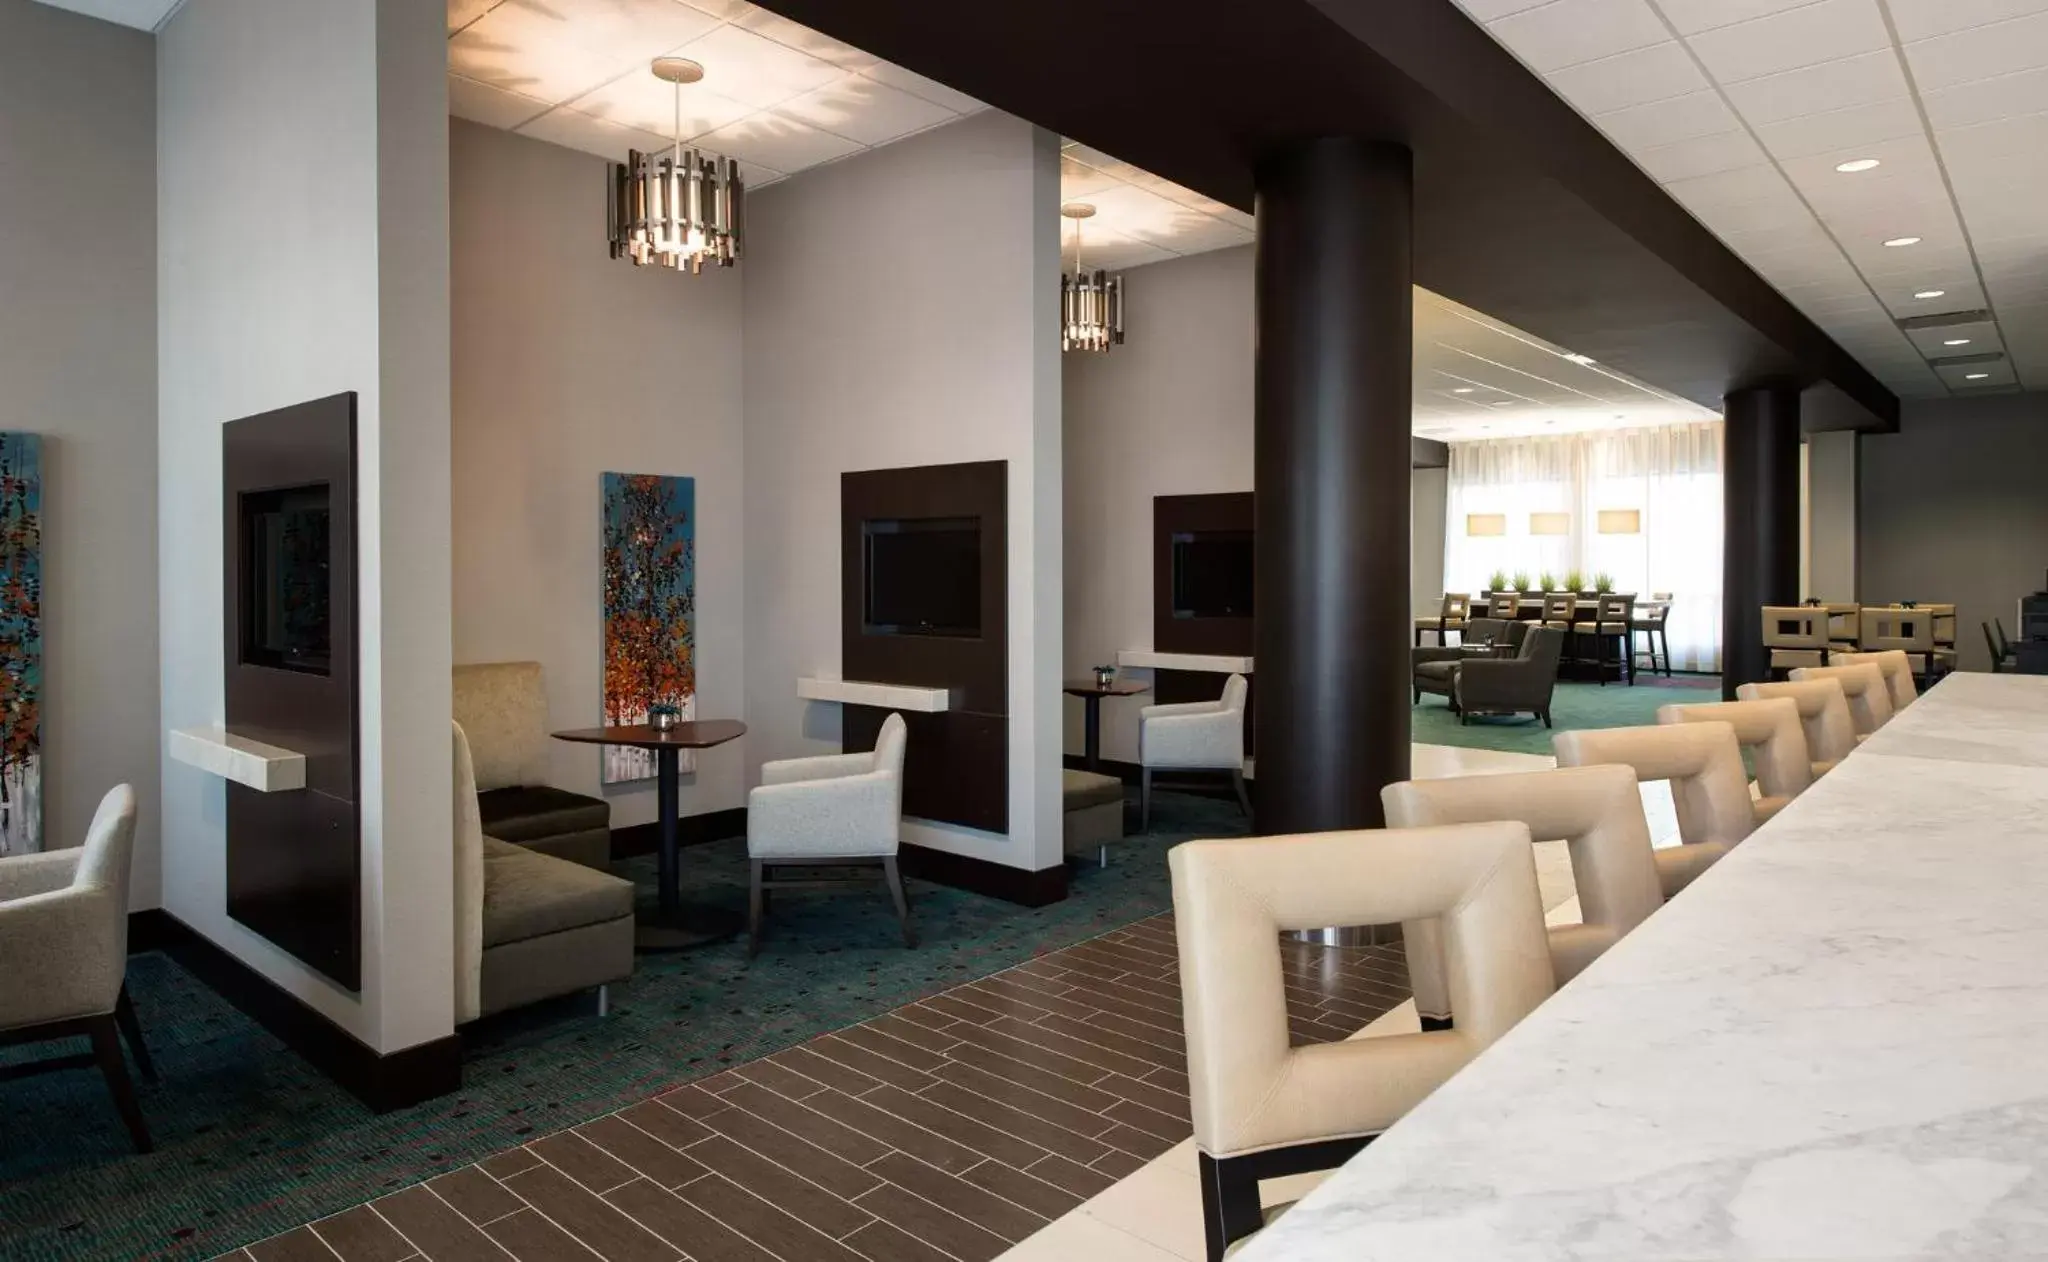 Other in Residence Inn by Marriott Calgary South